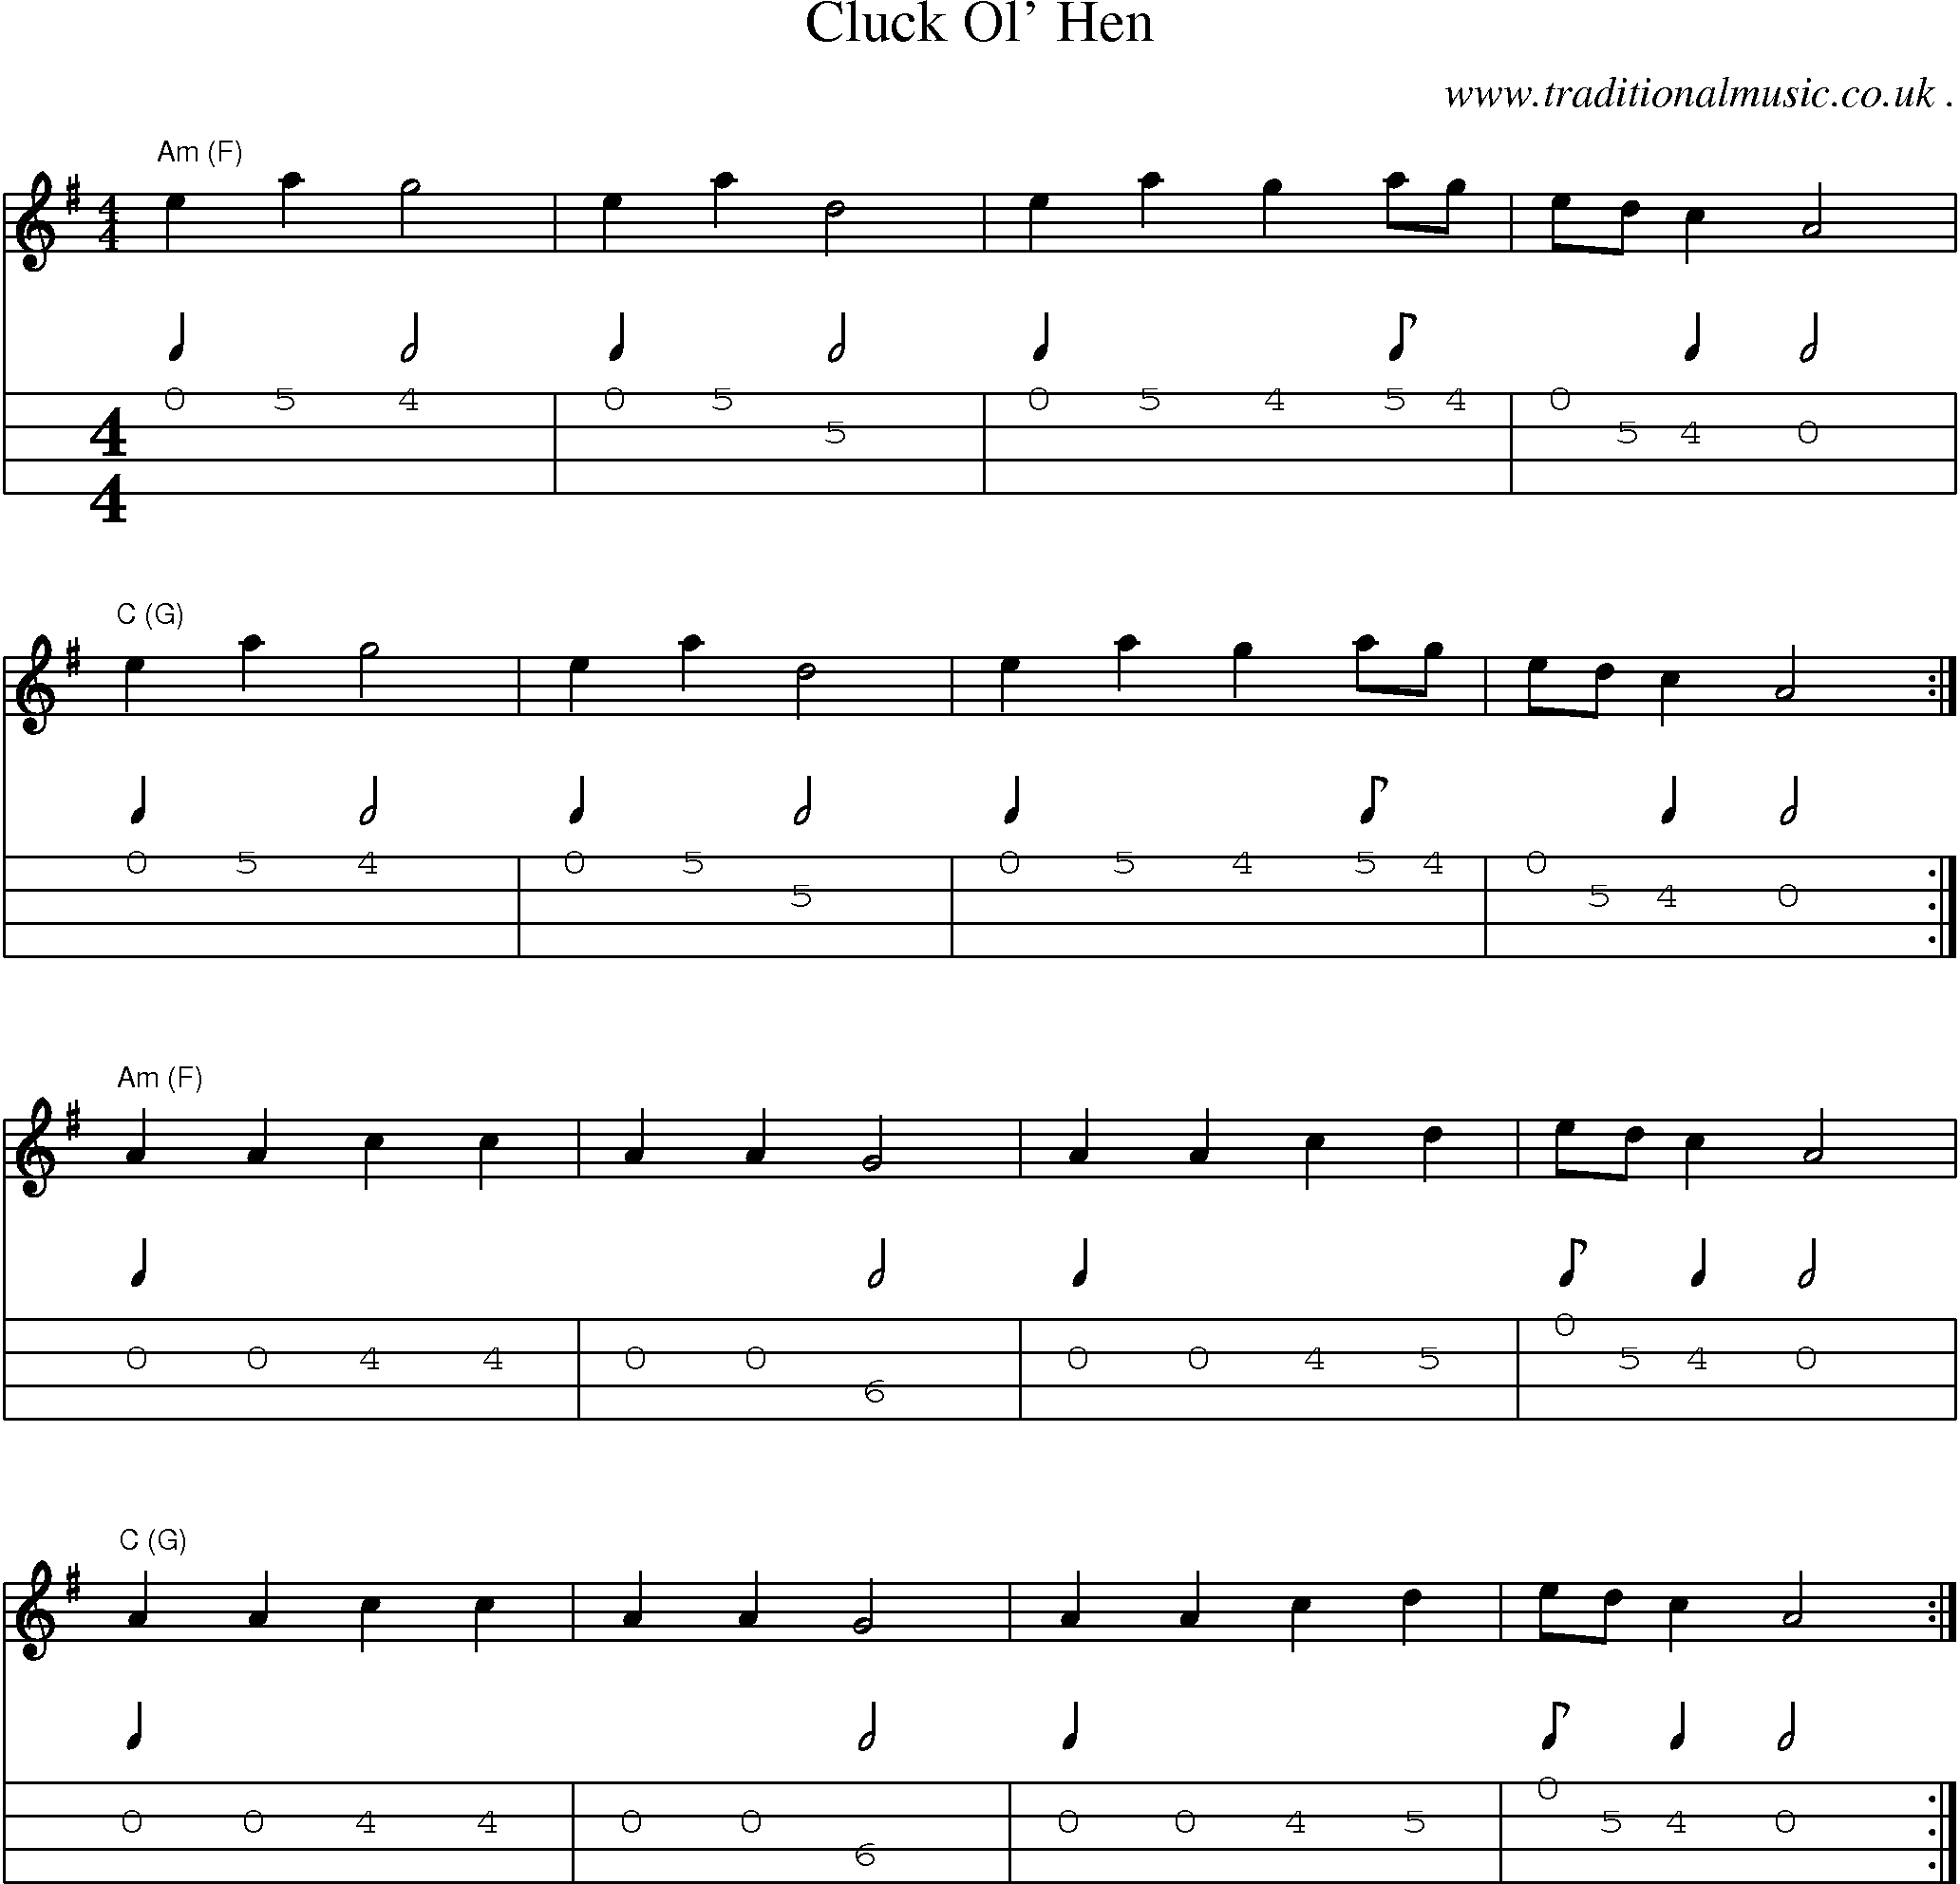 Music Score and Guitar Tabs for Cluck Ol Hen